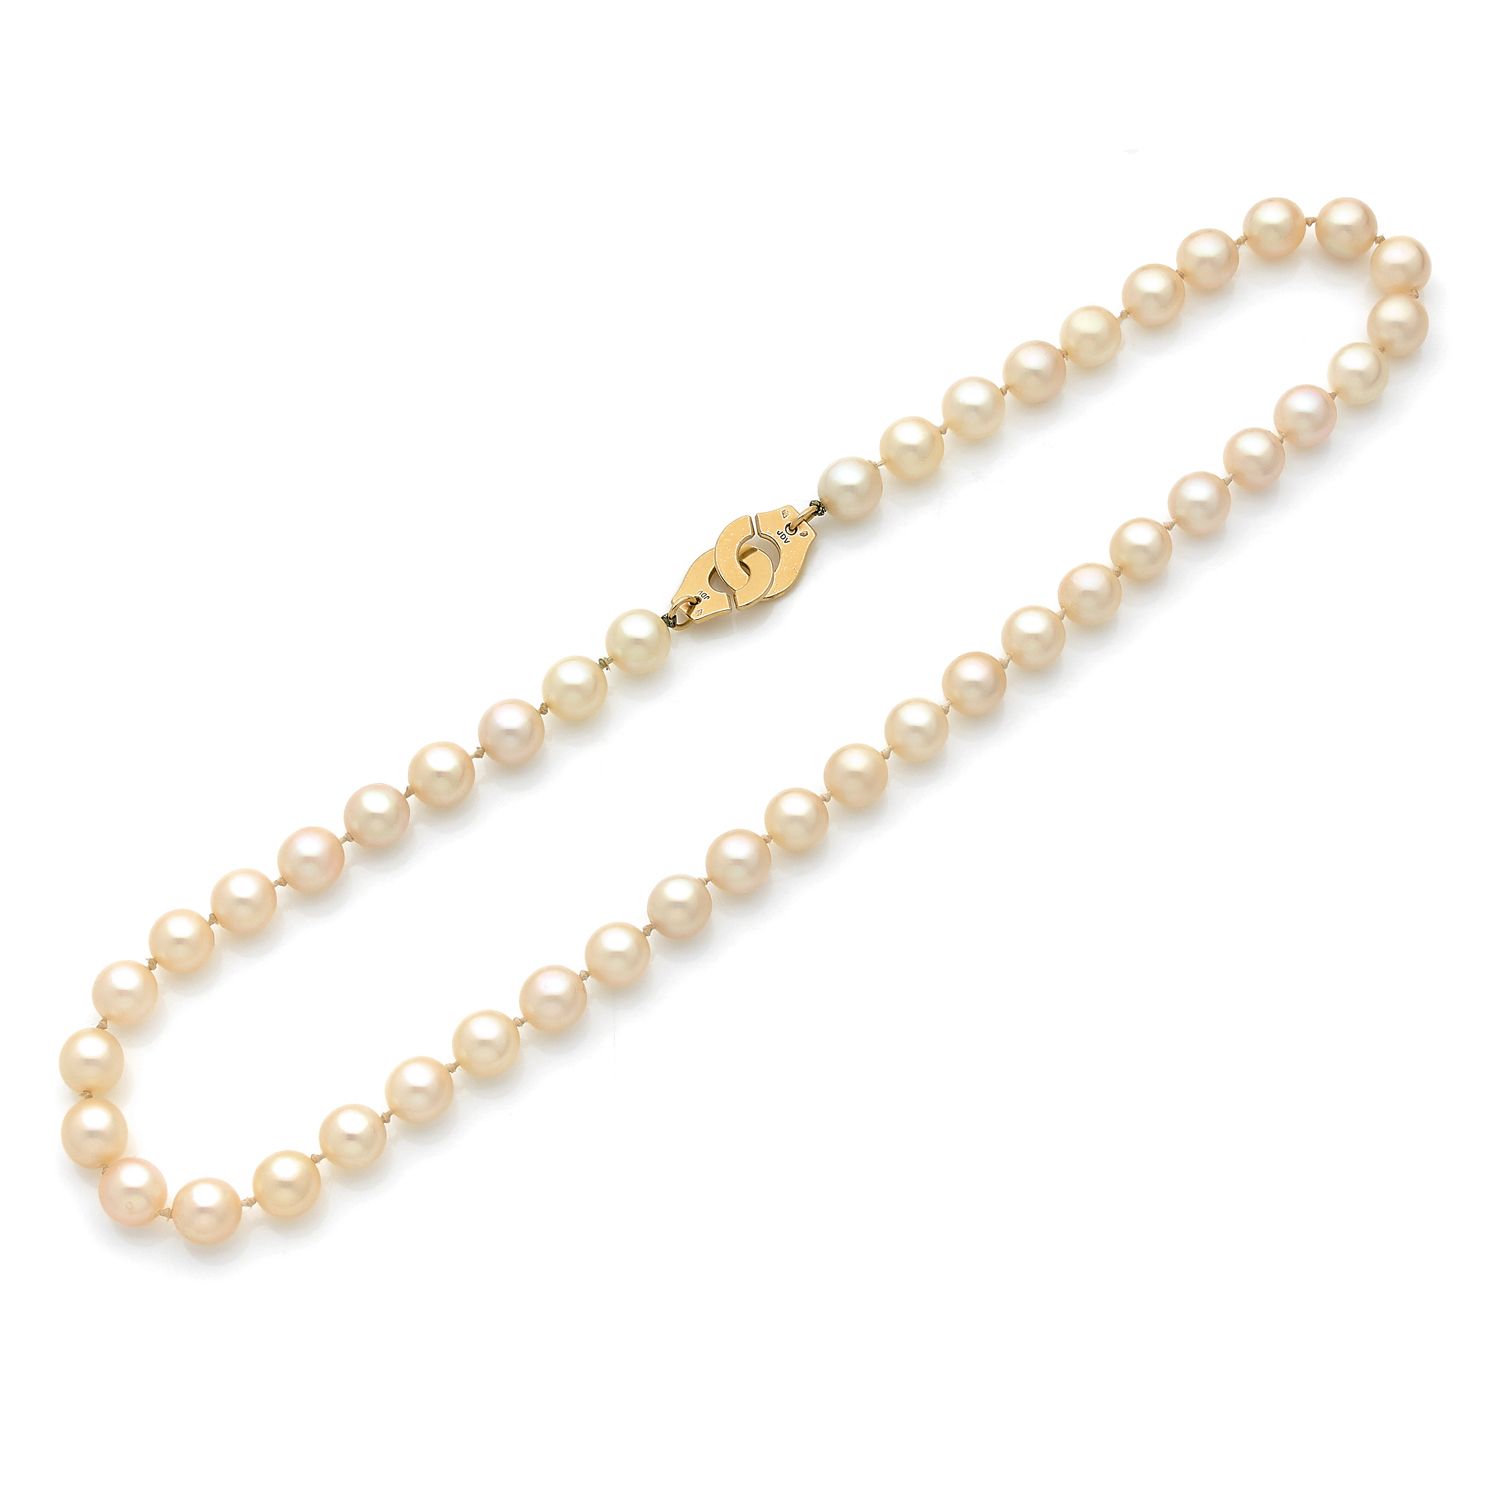 Null DINH VAN

Necklace with 43 cultured pearls with equal

diameters, cuff clas&hellip;